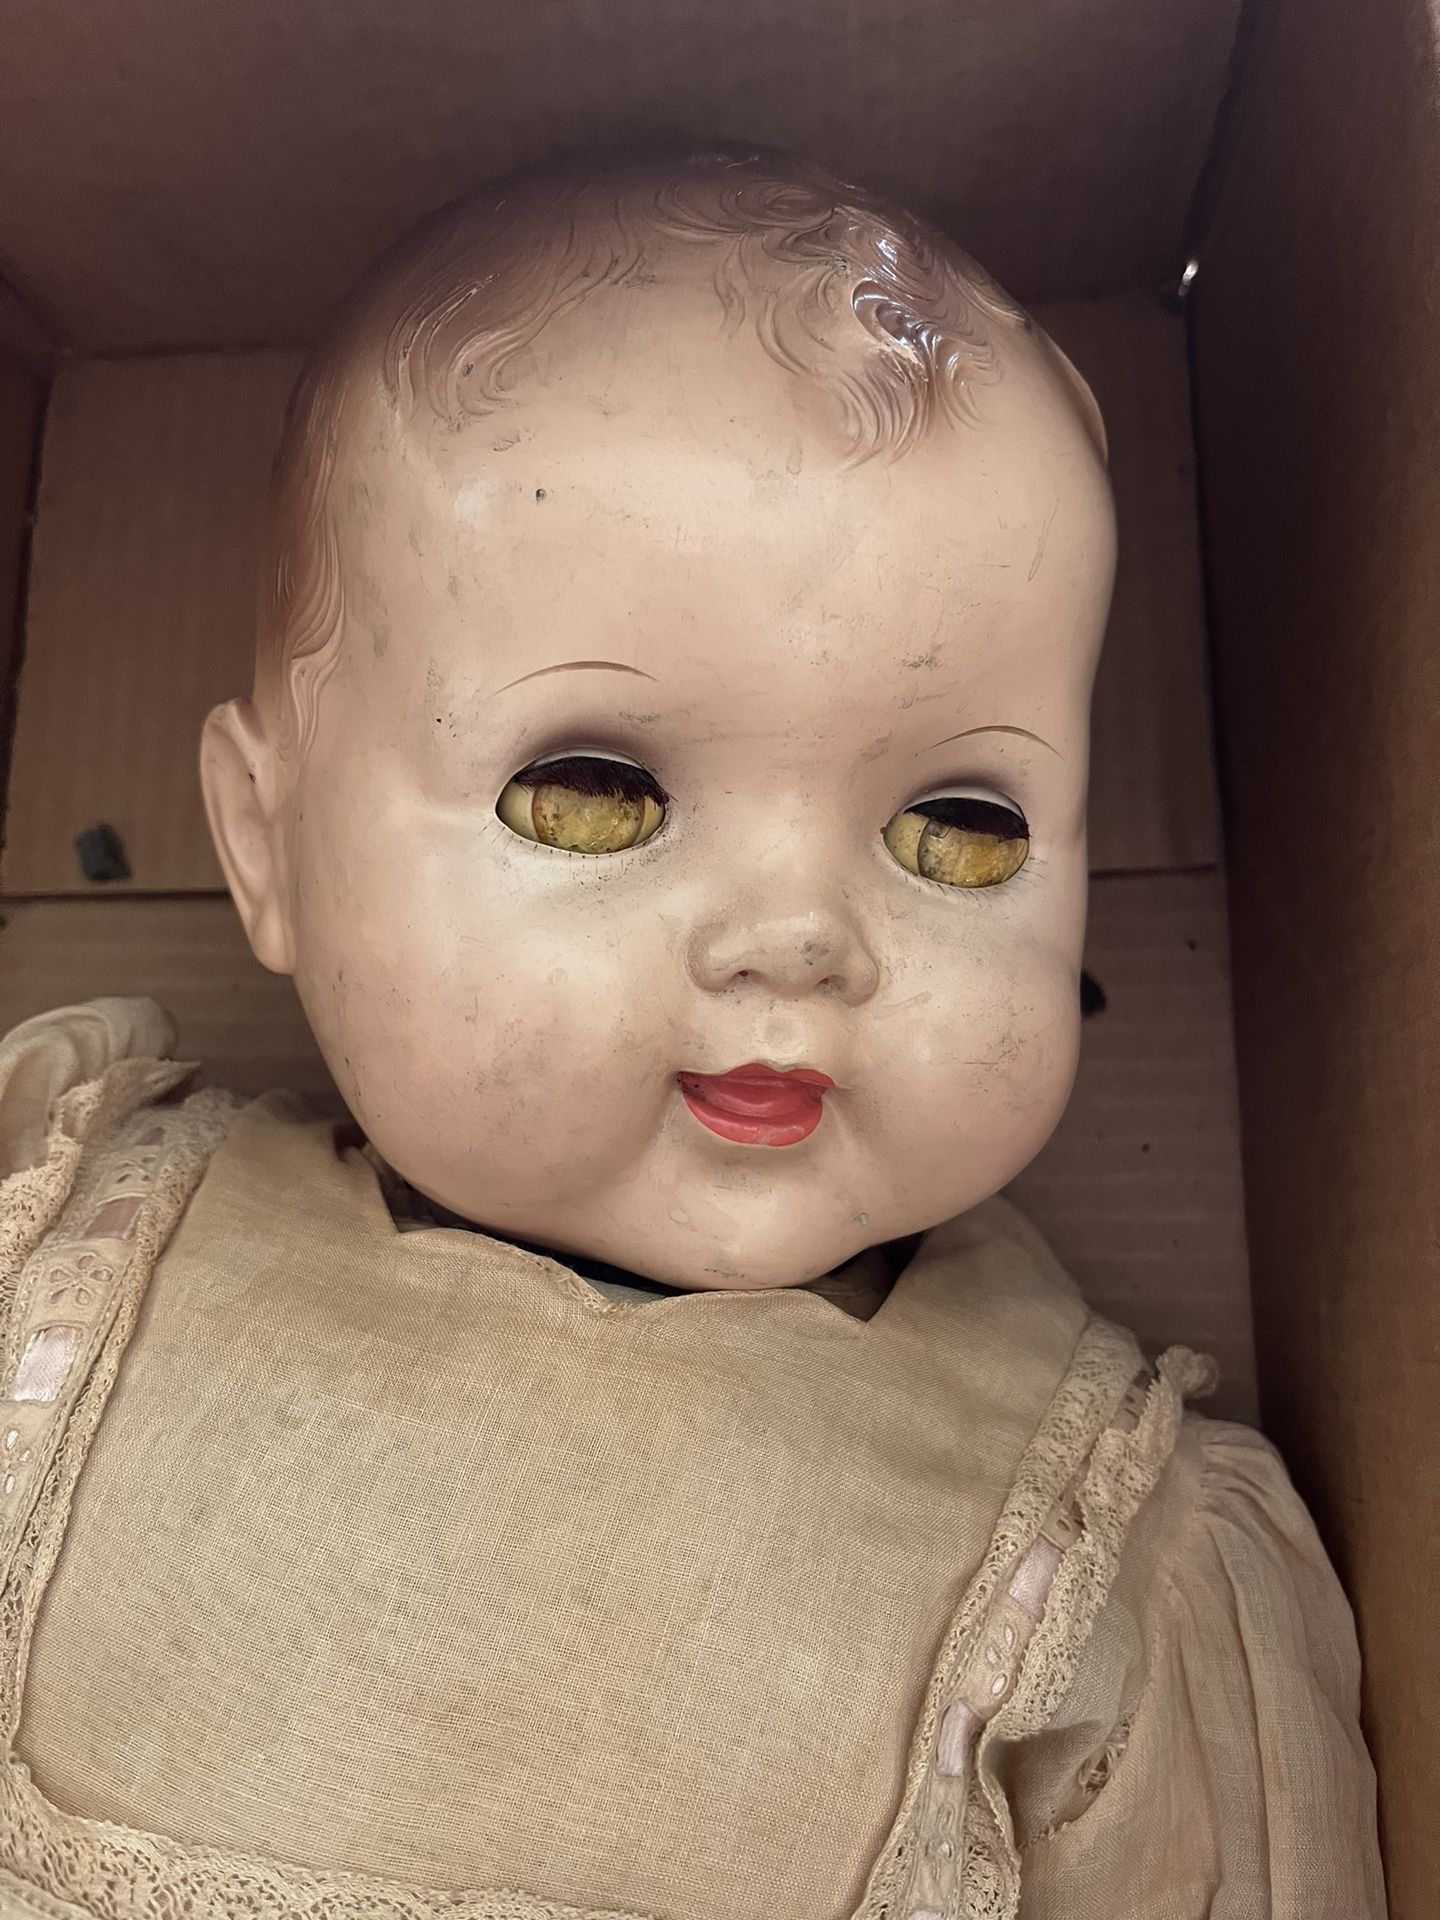 Antique (most likely Haunted) Doll